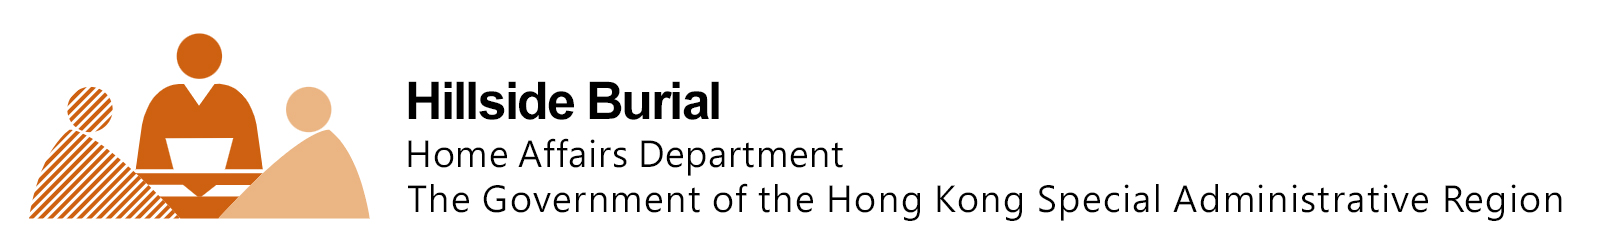 Hillside Burial The Government of the Hong Kong Special Administrative Region of the People’s Republic of China